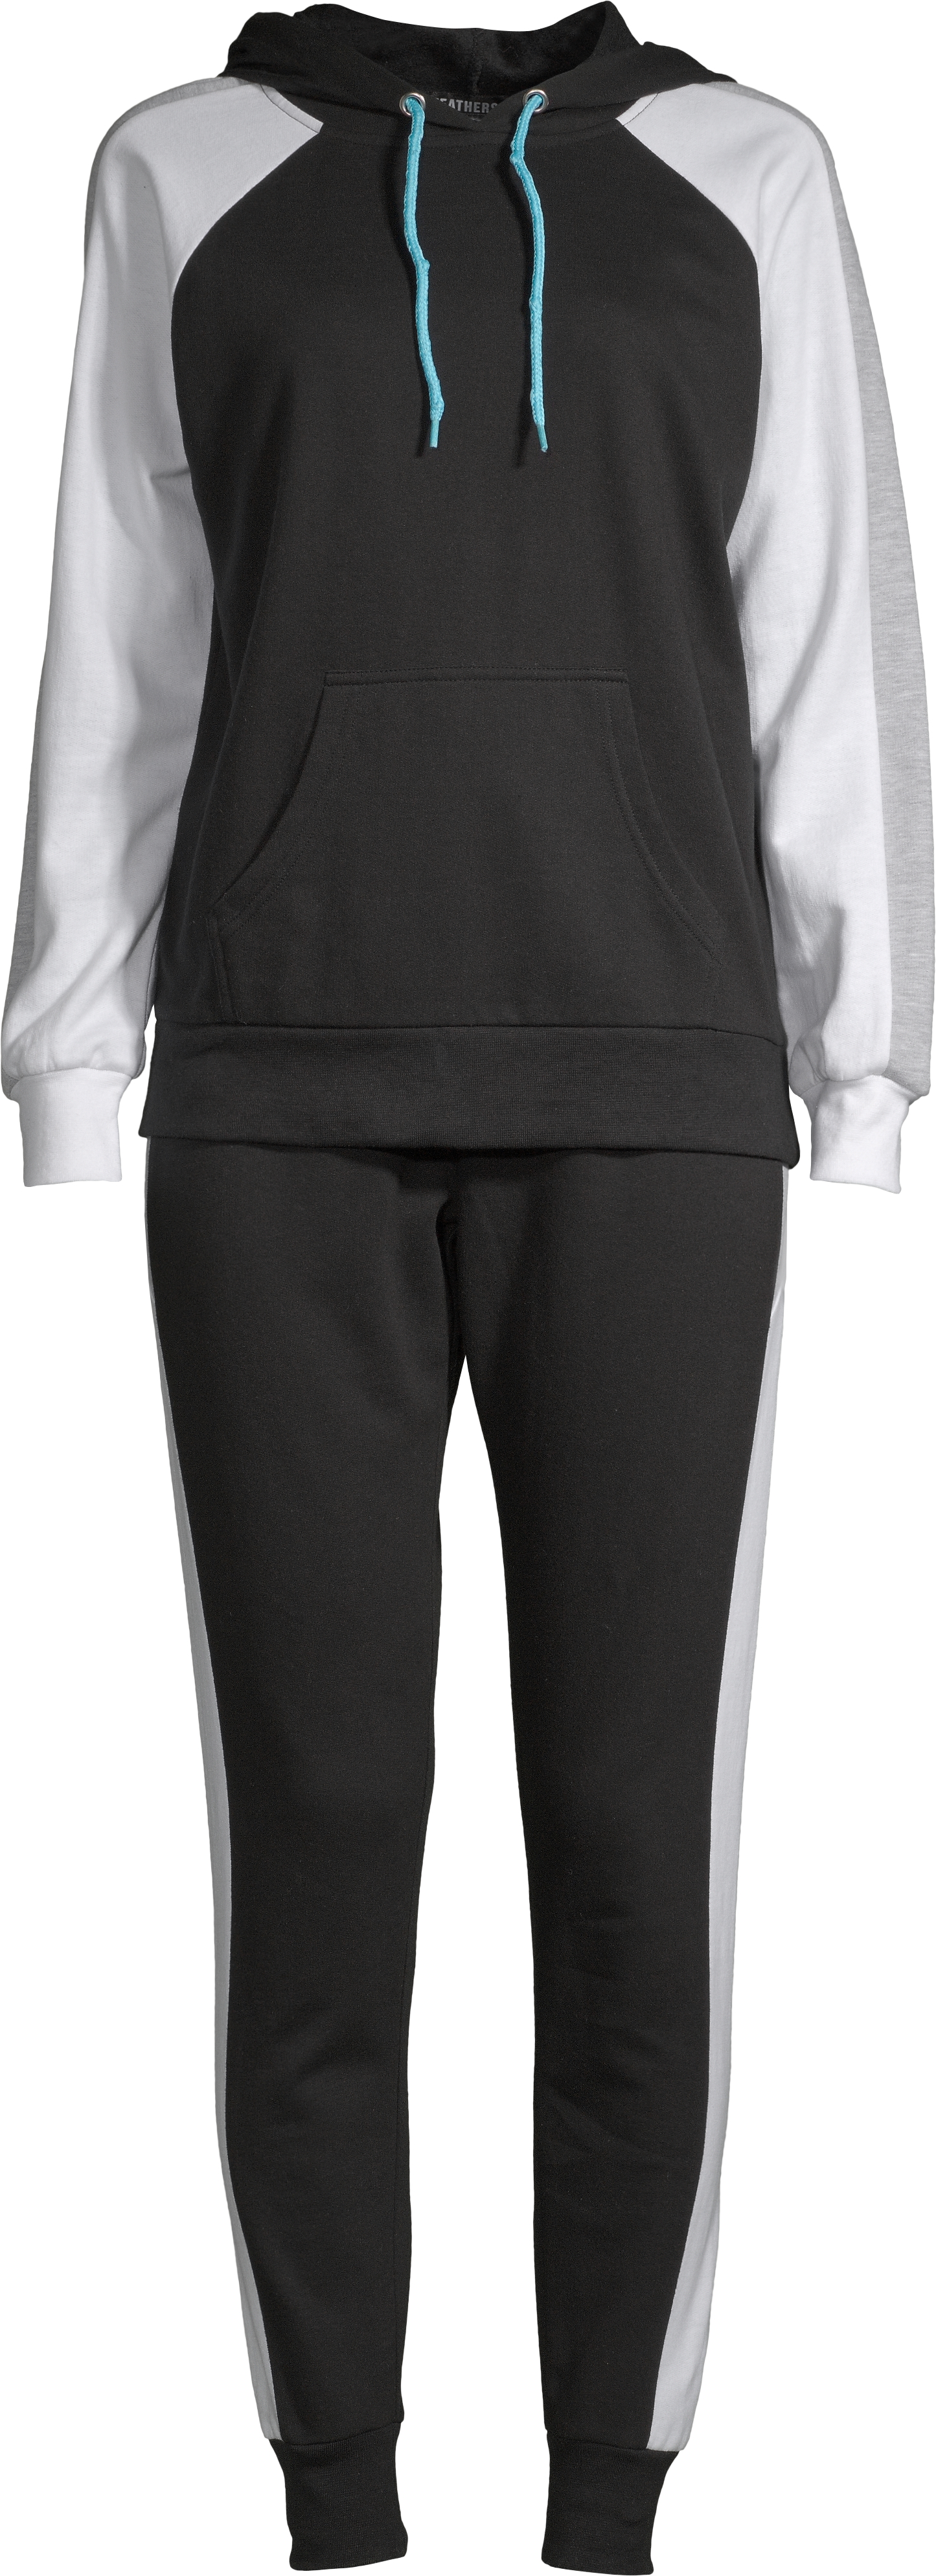 Feathers Women's Athleisure Fleece Hoodie and Jogger Set - image 5 of 5